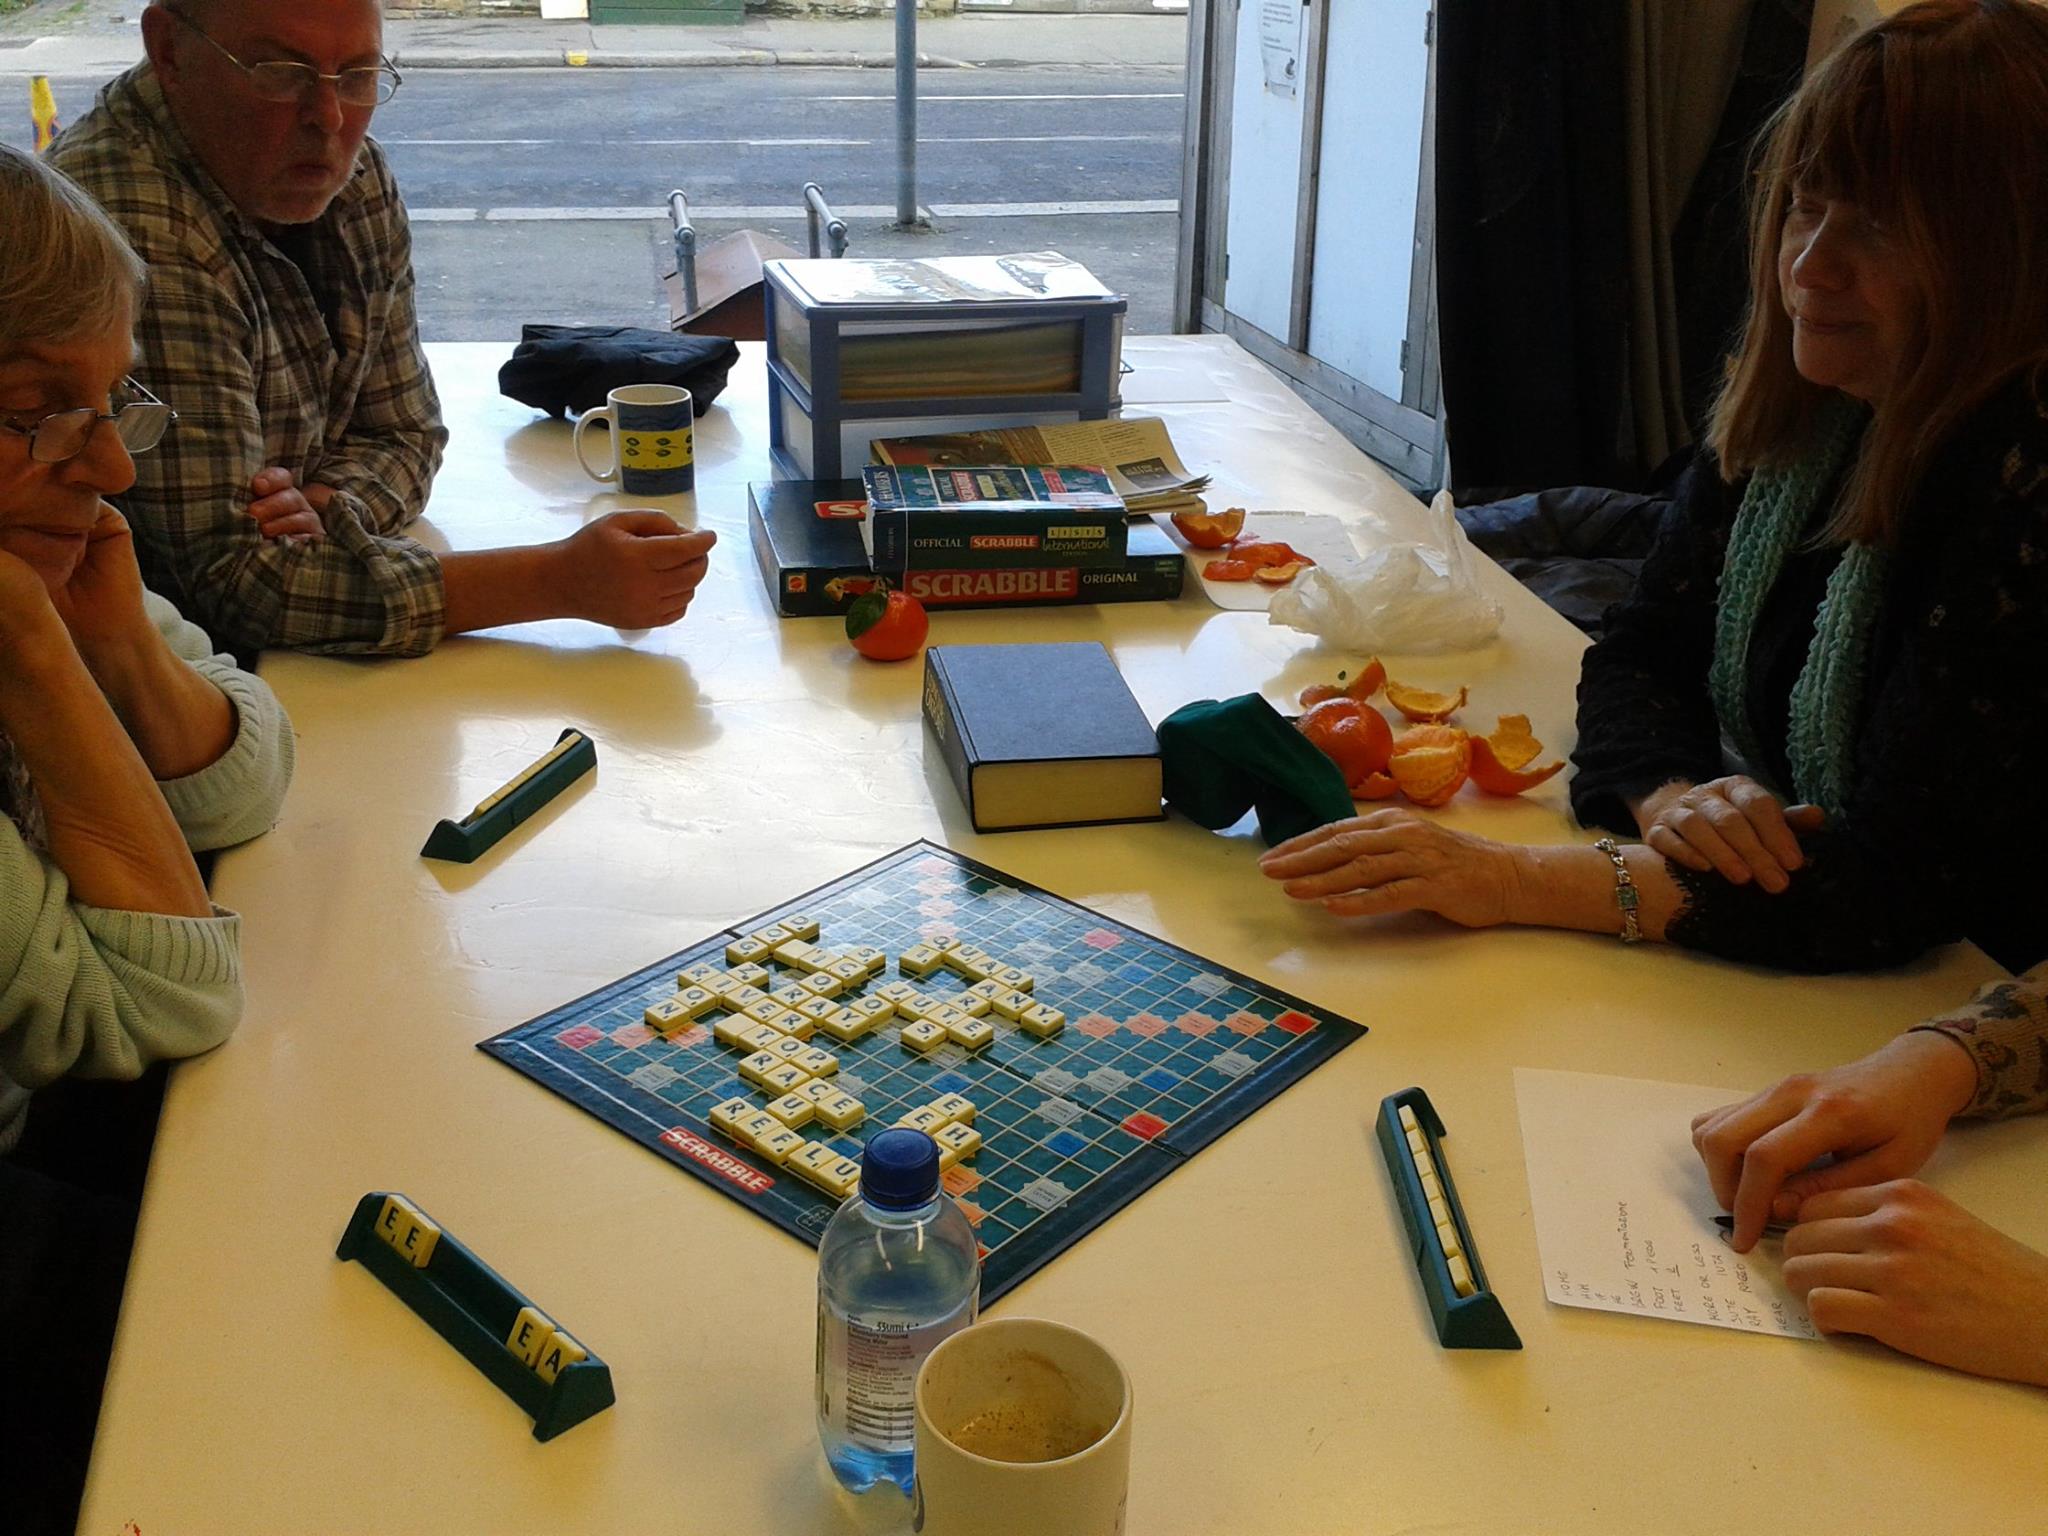 Words, Conversation and Scrabble Group